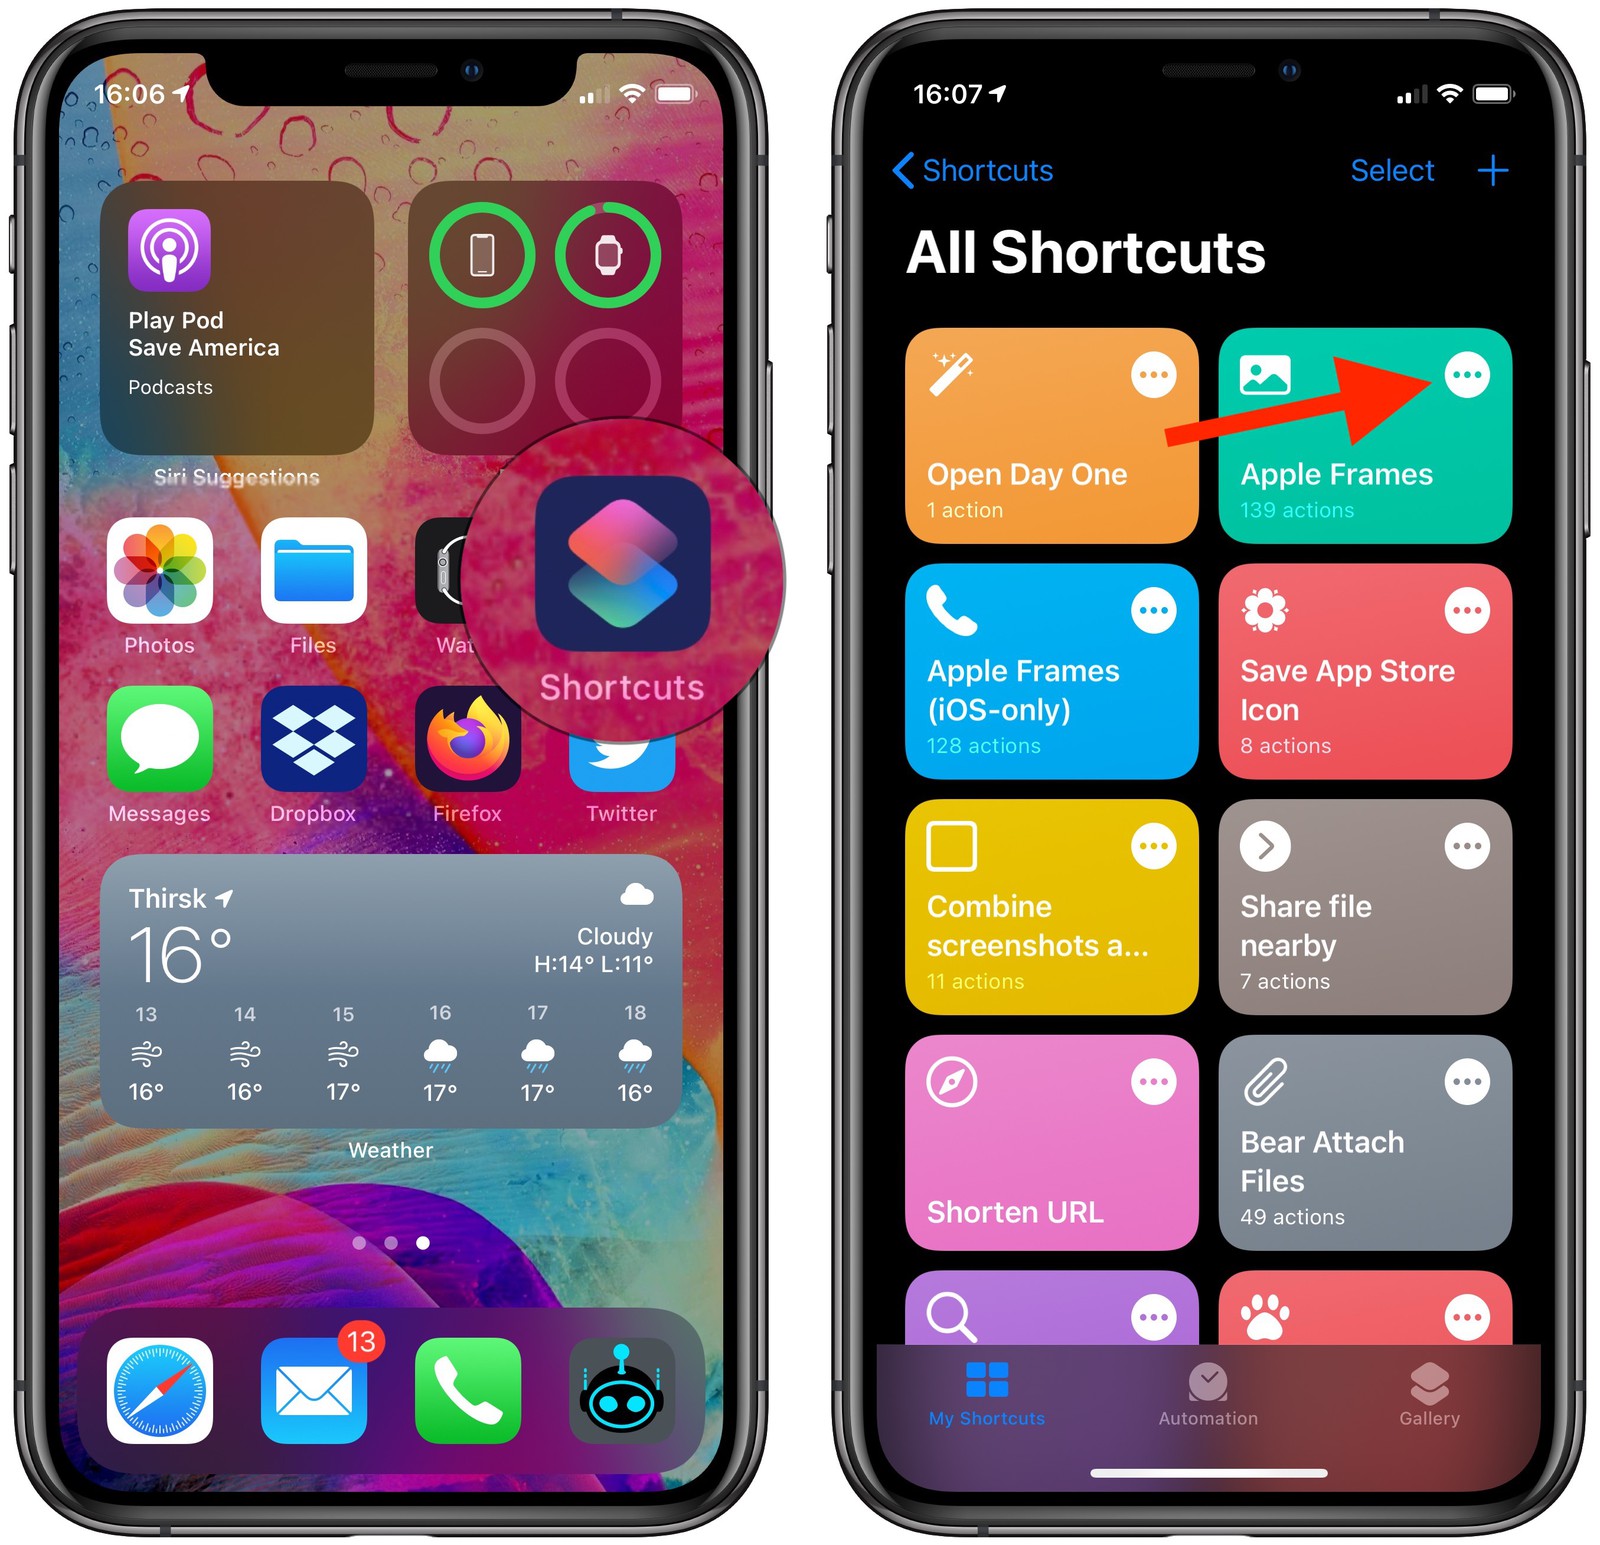 How to Add a Shortcut From the iOS Shortcuts App to Your Home Screen